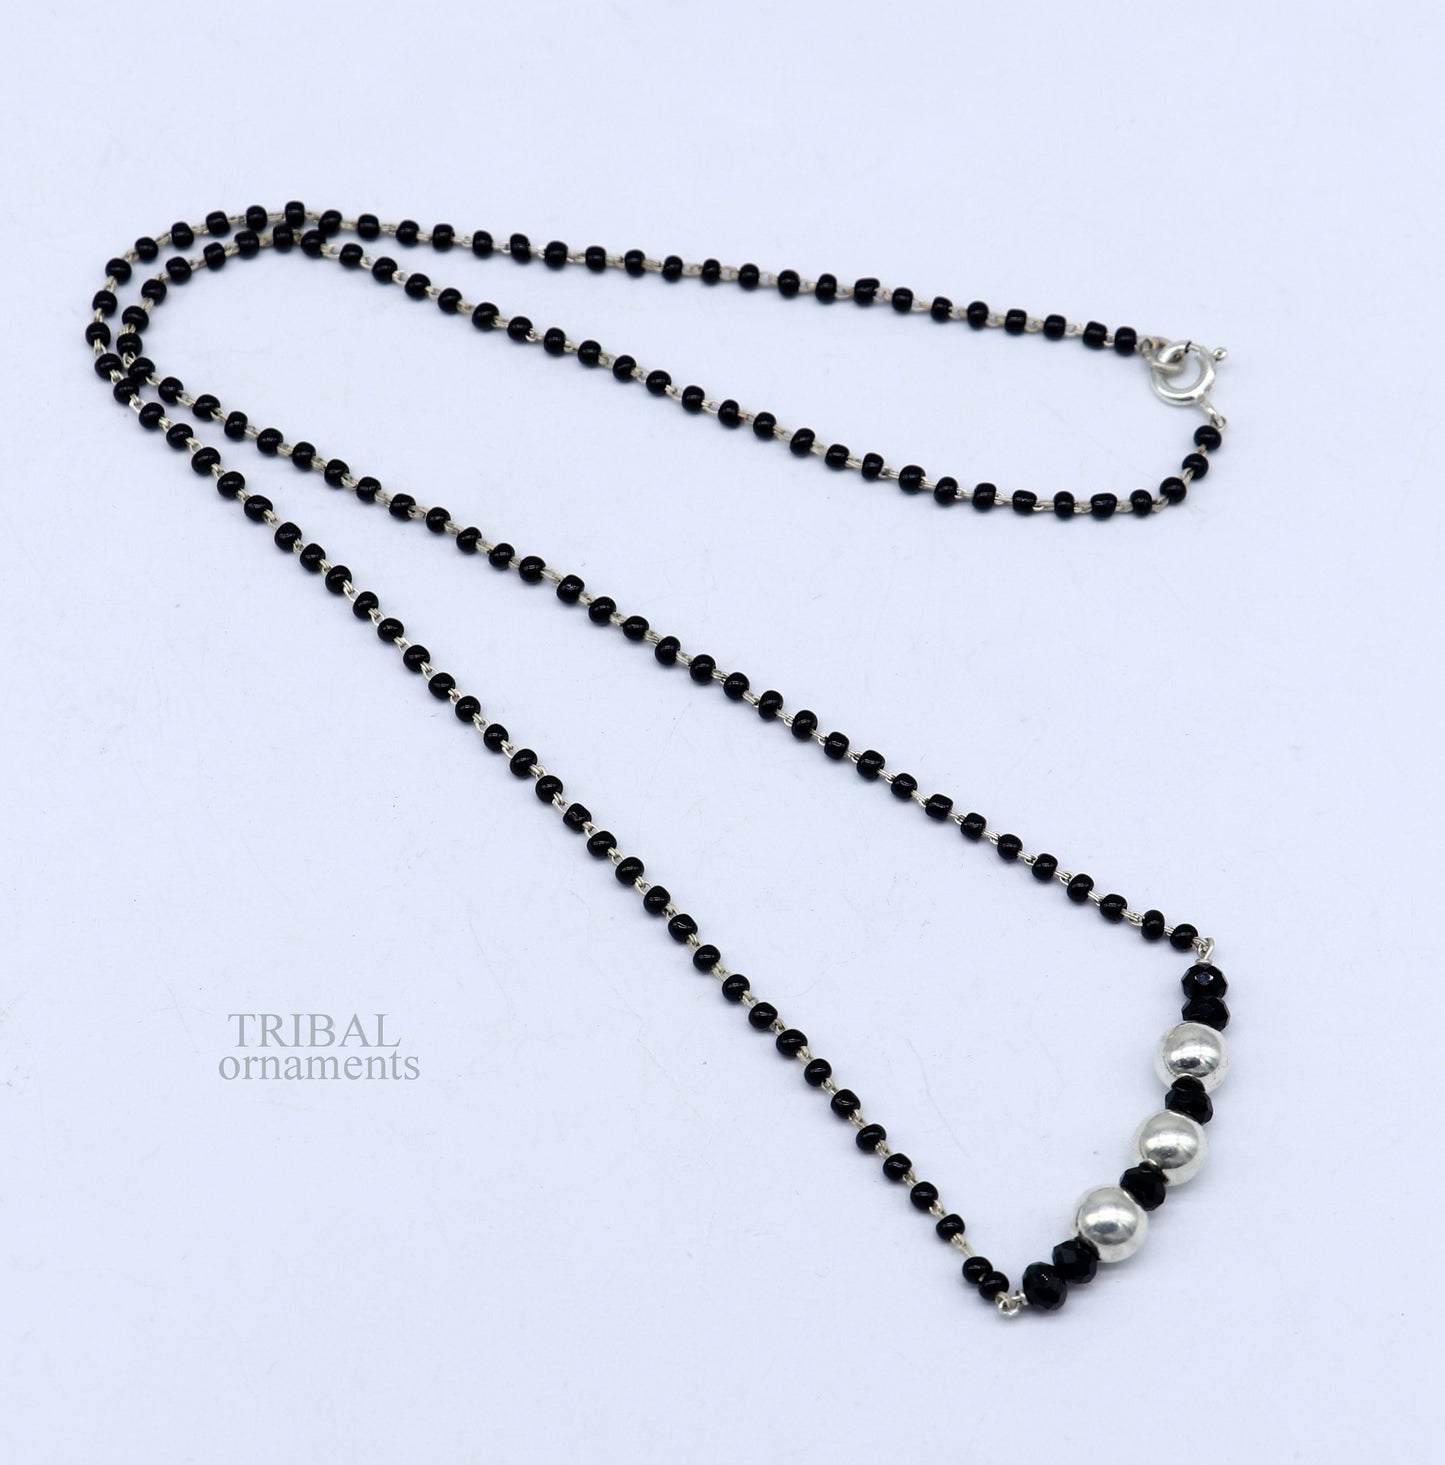 Elegant 925 sterling silver black beads chain necklace, gorgeous small silver bead design pendant, Mangalsutra chain beaded necklace set325 - TRIBAL ORNAMENTS